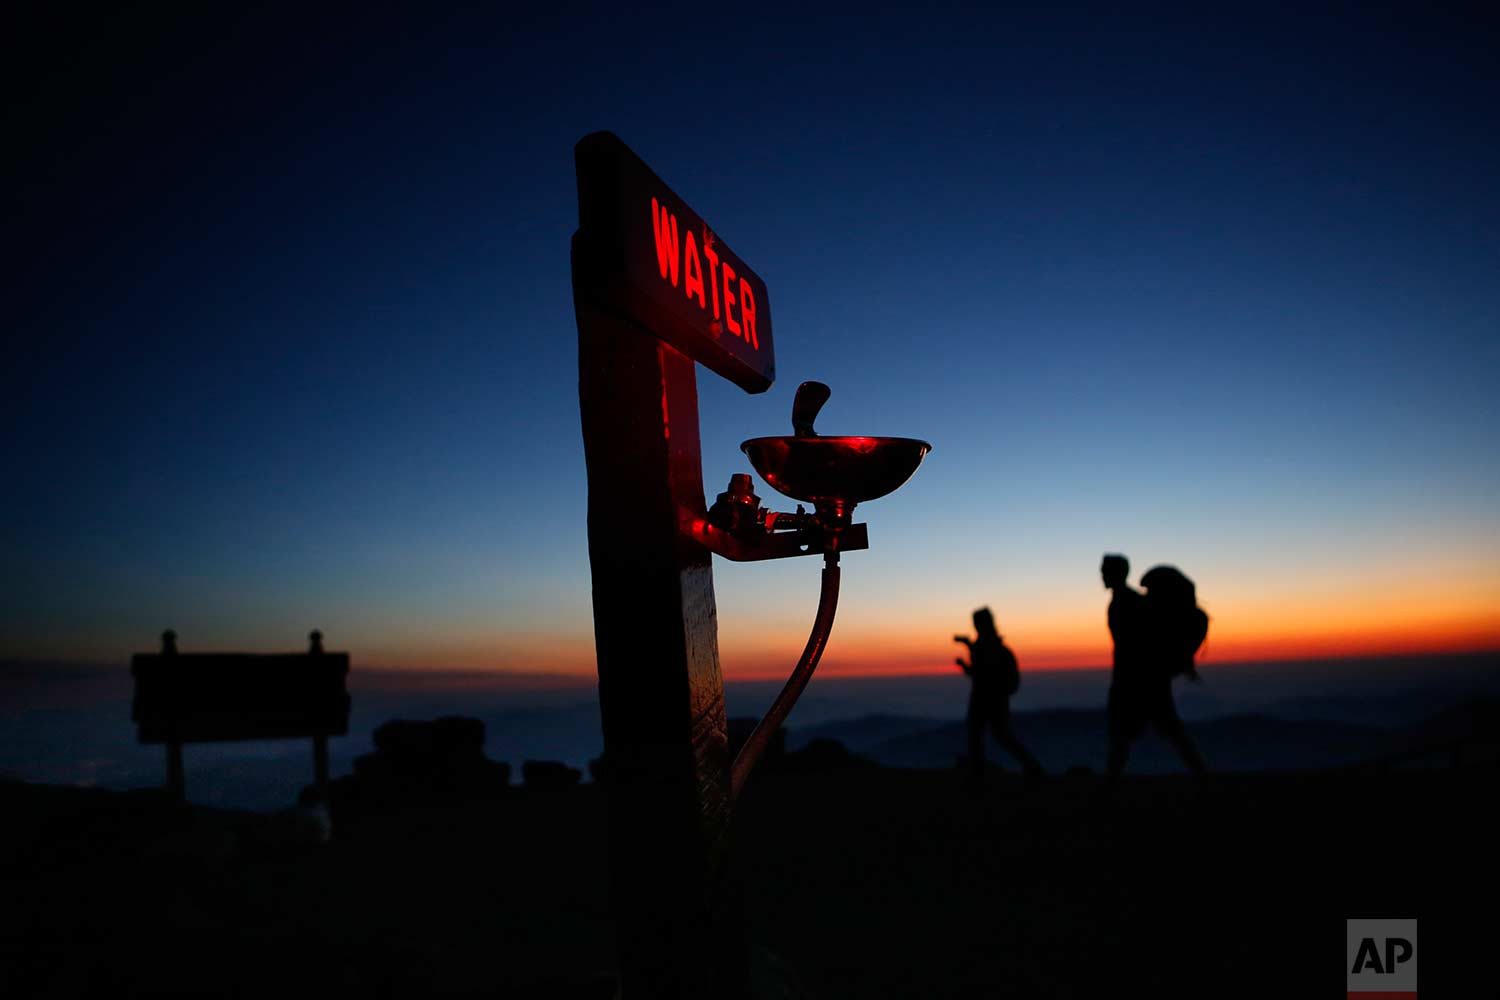  In this Sunday, Sept. 24, 2017 photo, Quincy Andrews, left, and Josh Fournier, both of Meredith, N.H., arrive at dawn at the summit of Mount Washington, N.H., where a water fountain awaits visitors to New England's highest peak. The weather observat